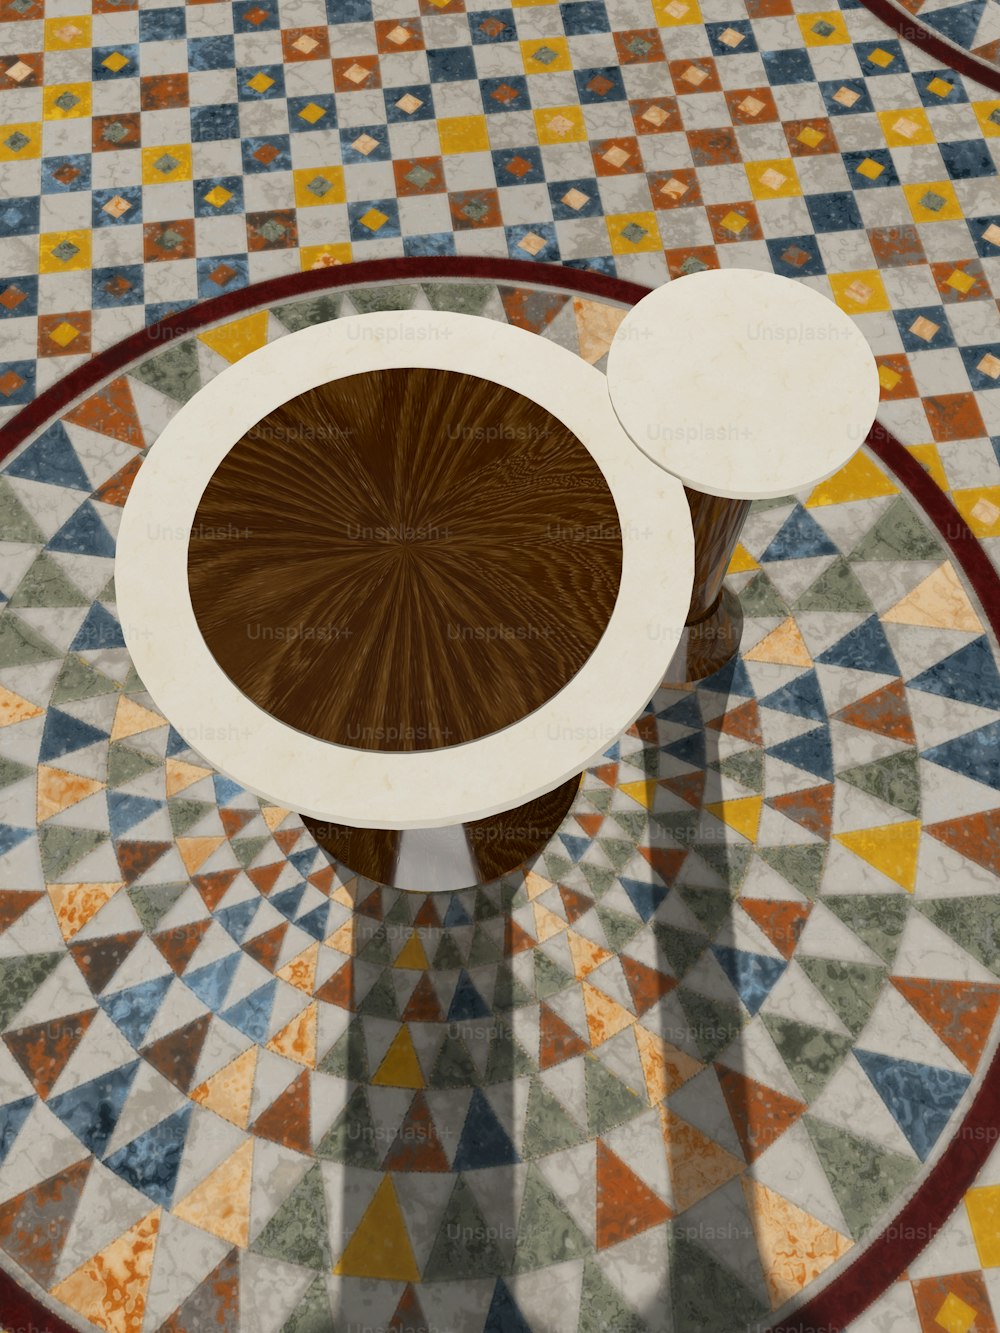 a white and brown table sitting on top of a tiled floor